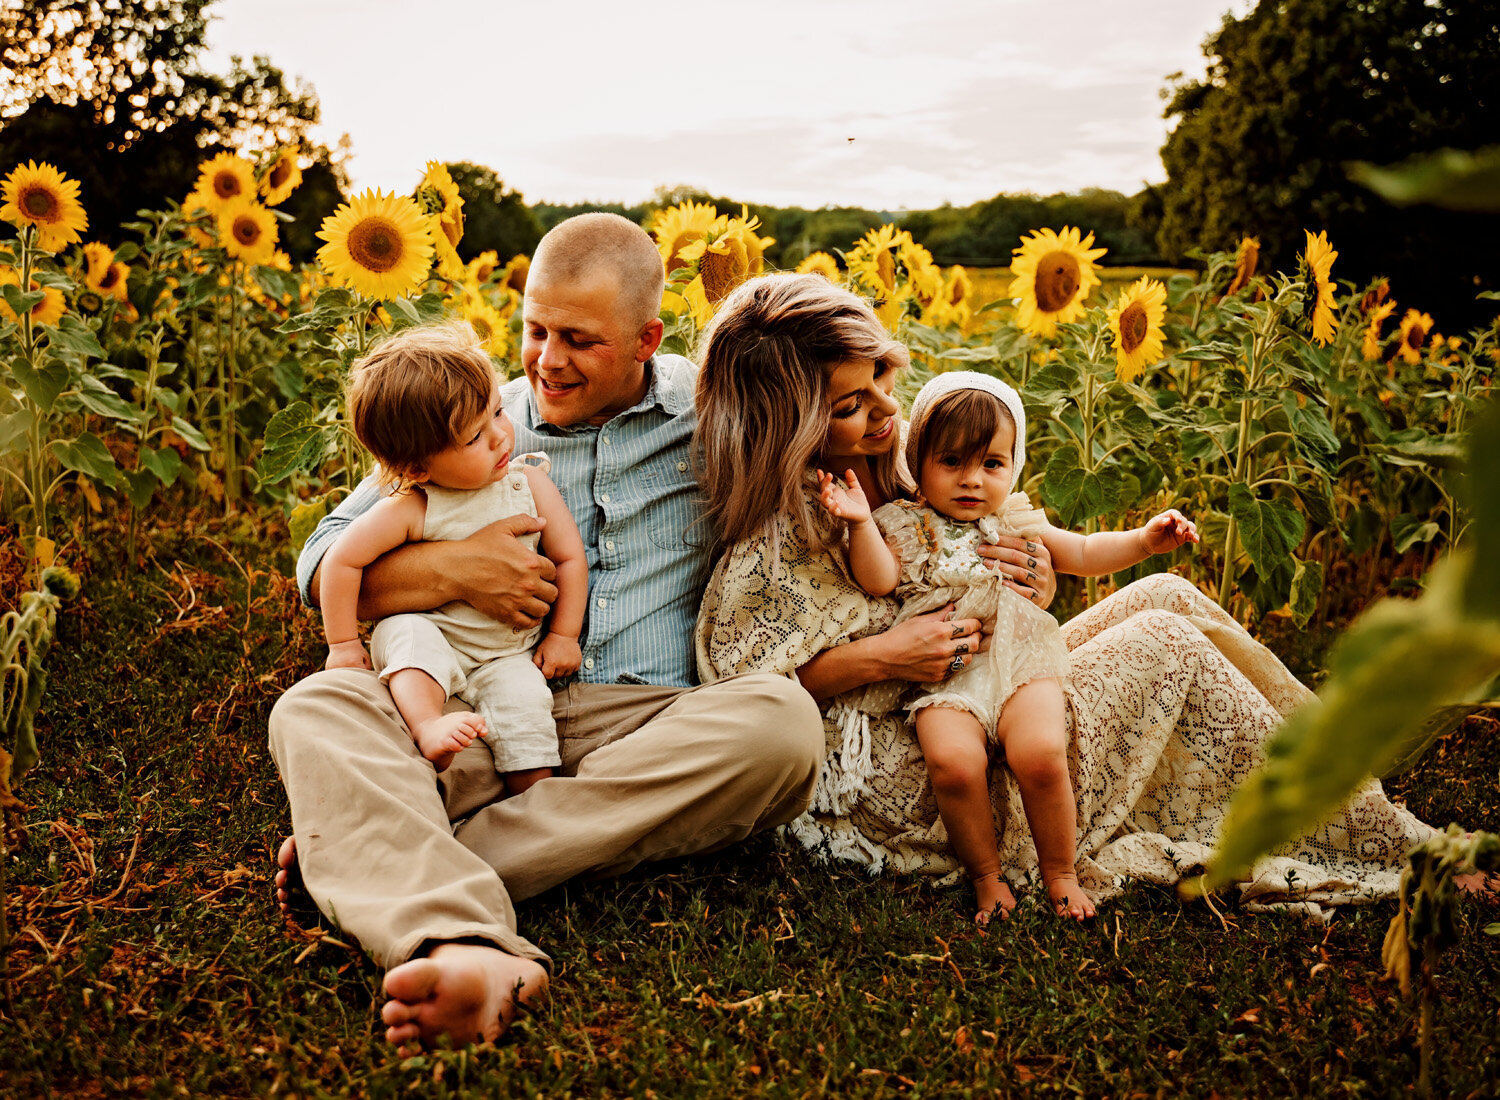  Beautiful family photo session in s big sunflower field. Young family with twins in boho outfits and flutter dress by ramstein kmc family photographer sarah havens 